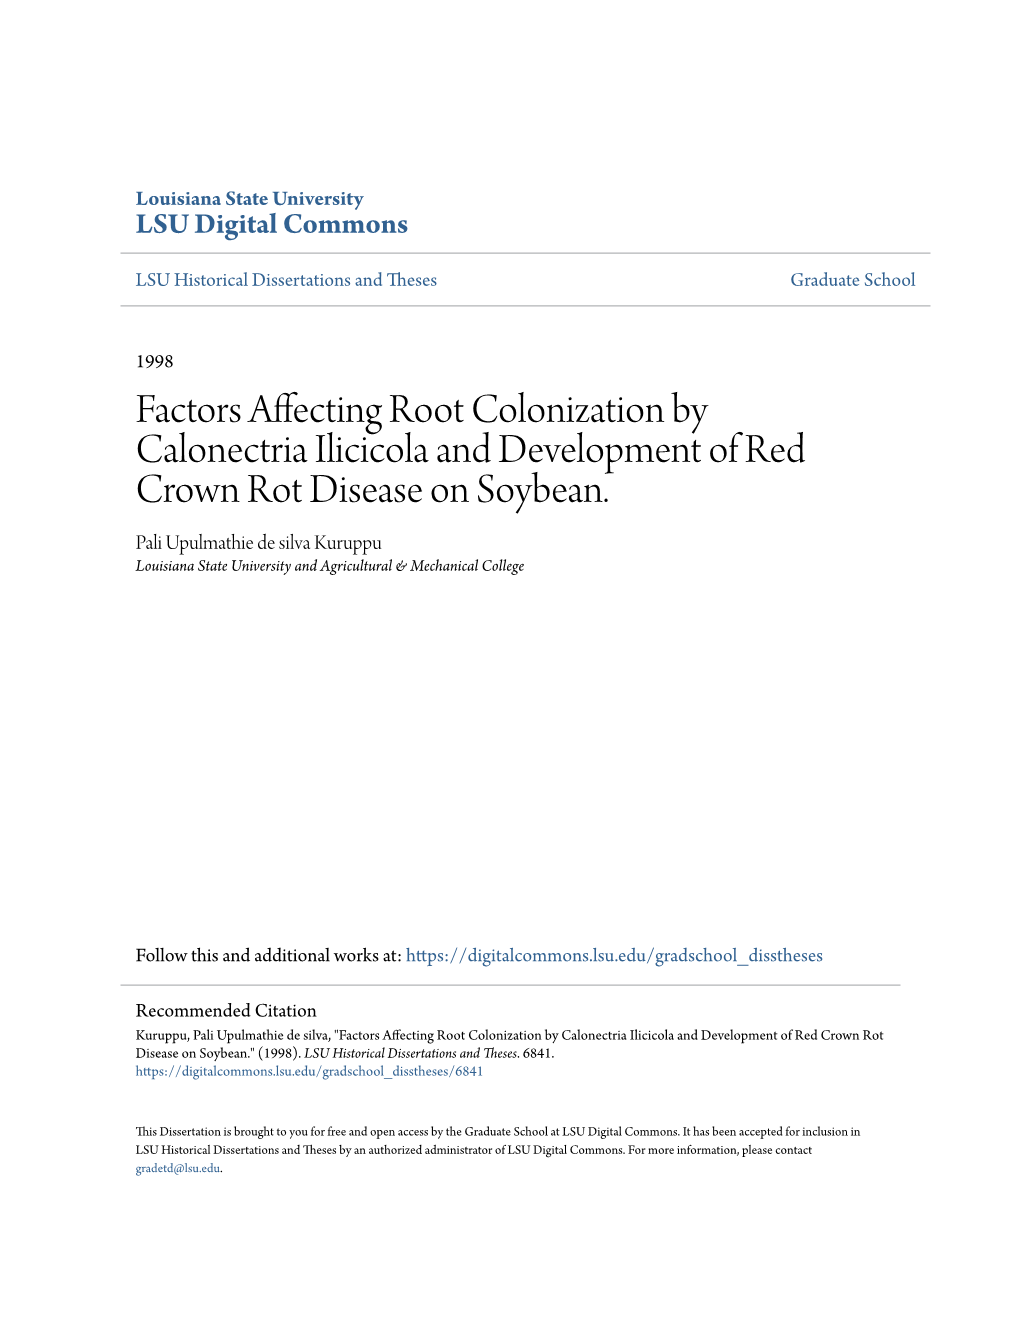 Factors Affecting Root Colonization by Calonectria Ilicicola and Development of Red Crown Rot Disease on Soybean